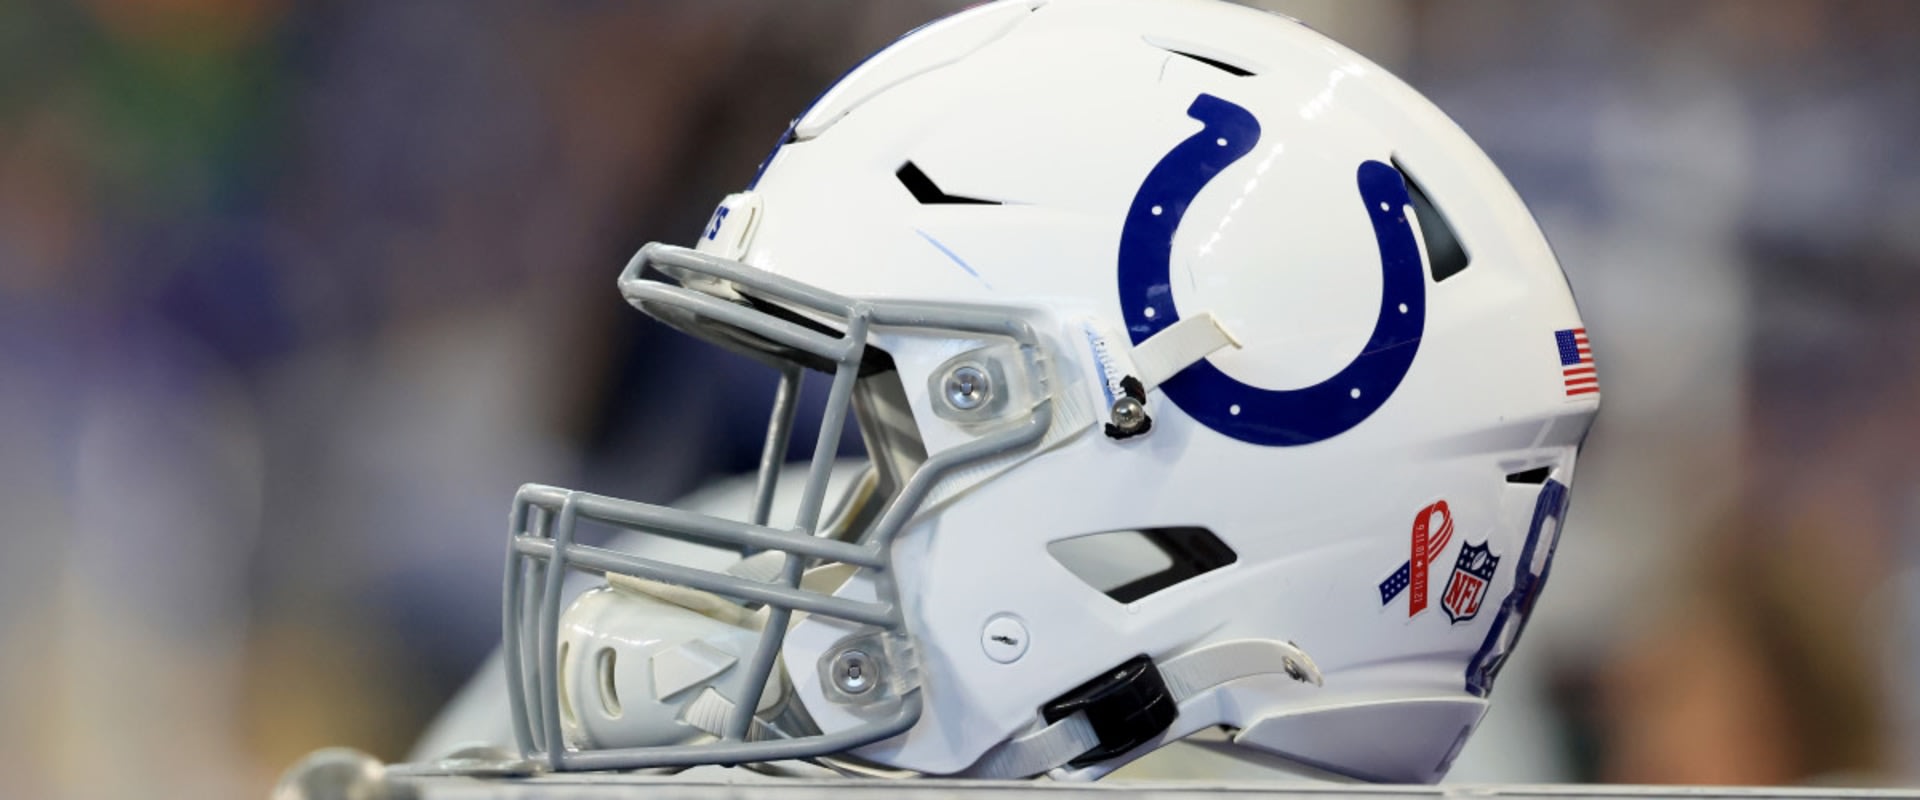 Who is the quarterback for the indianapolis colts today?